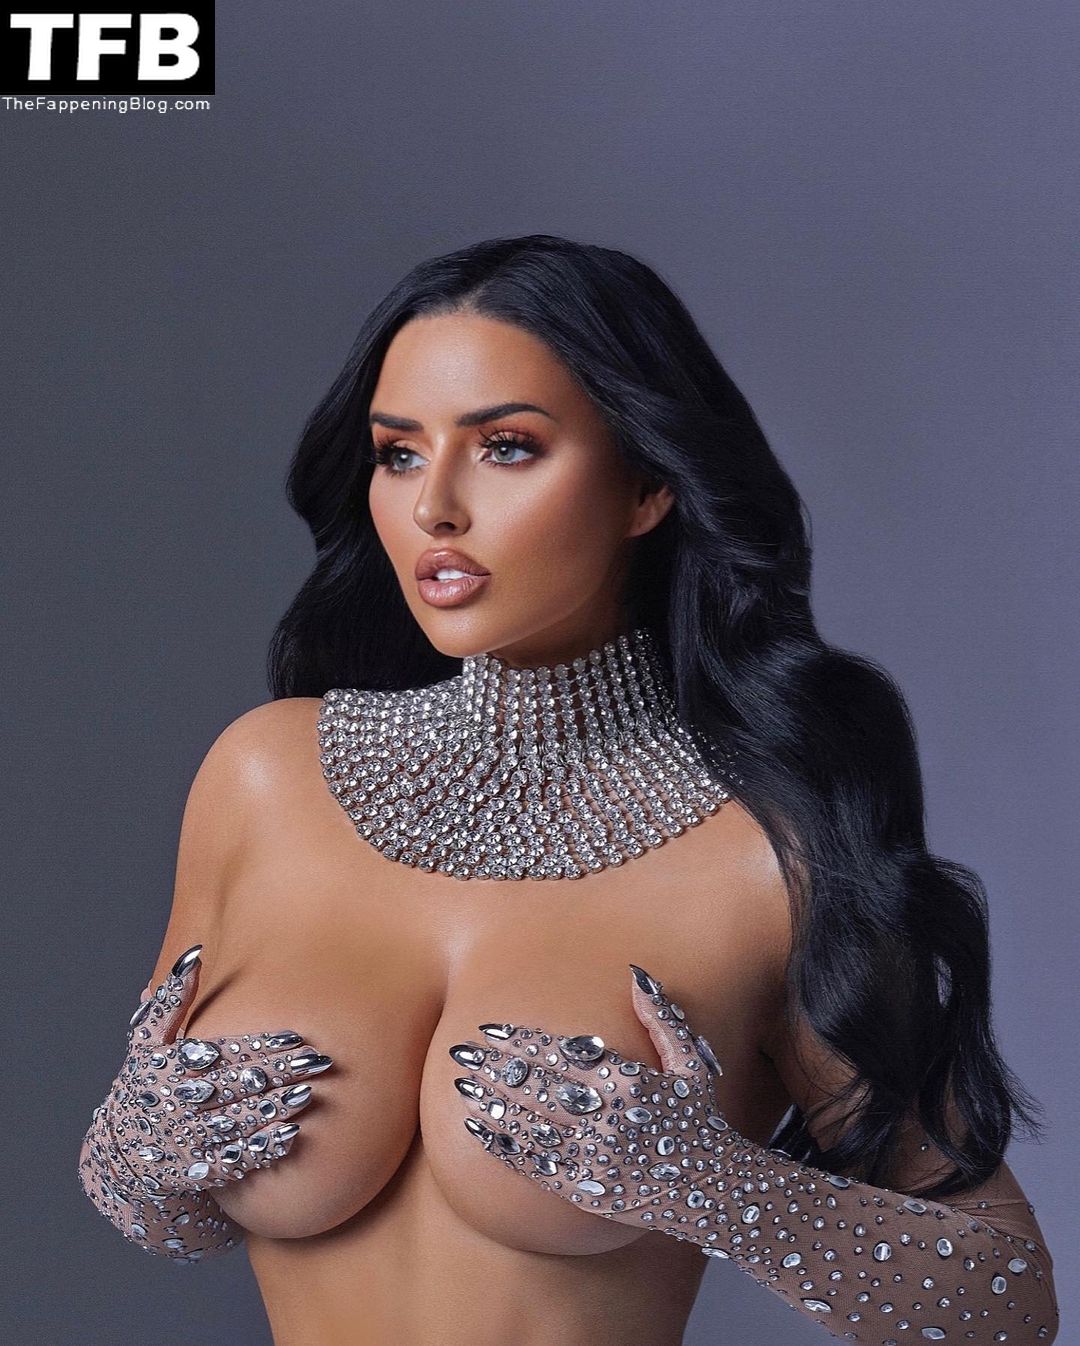 Abigail ratchford fappening